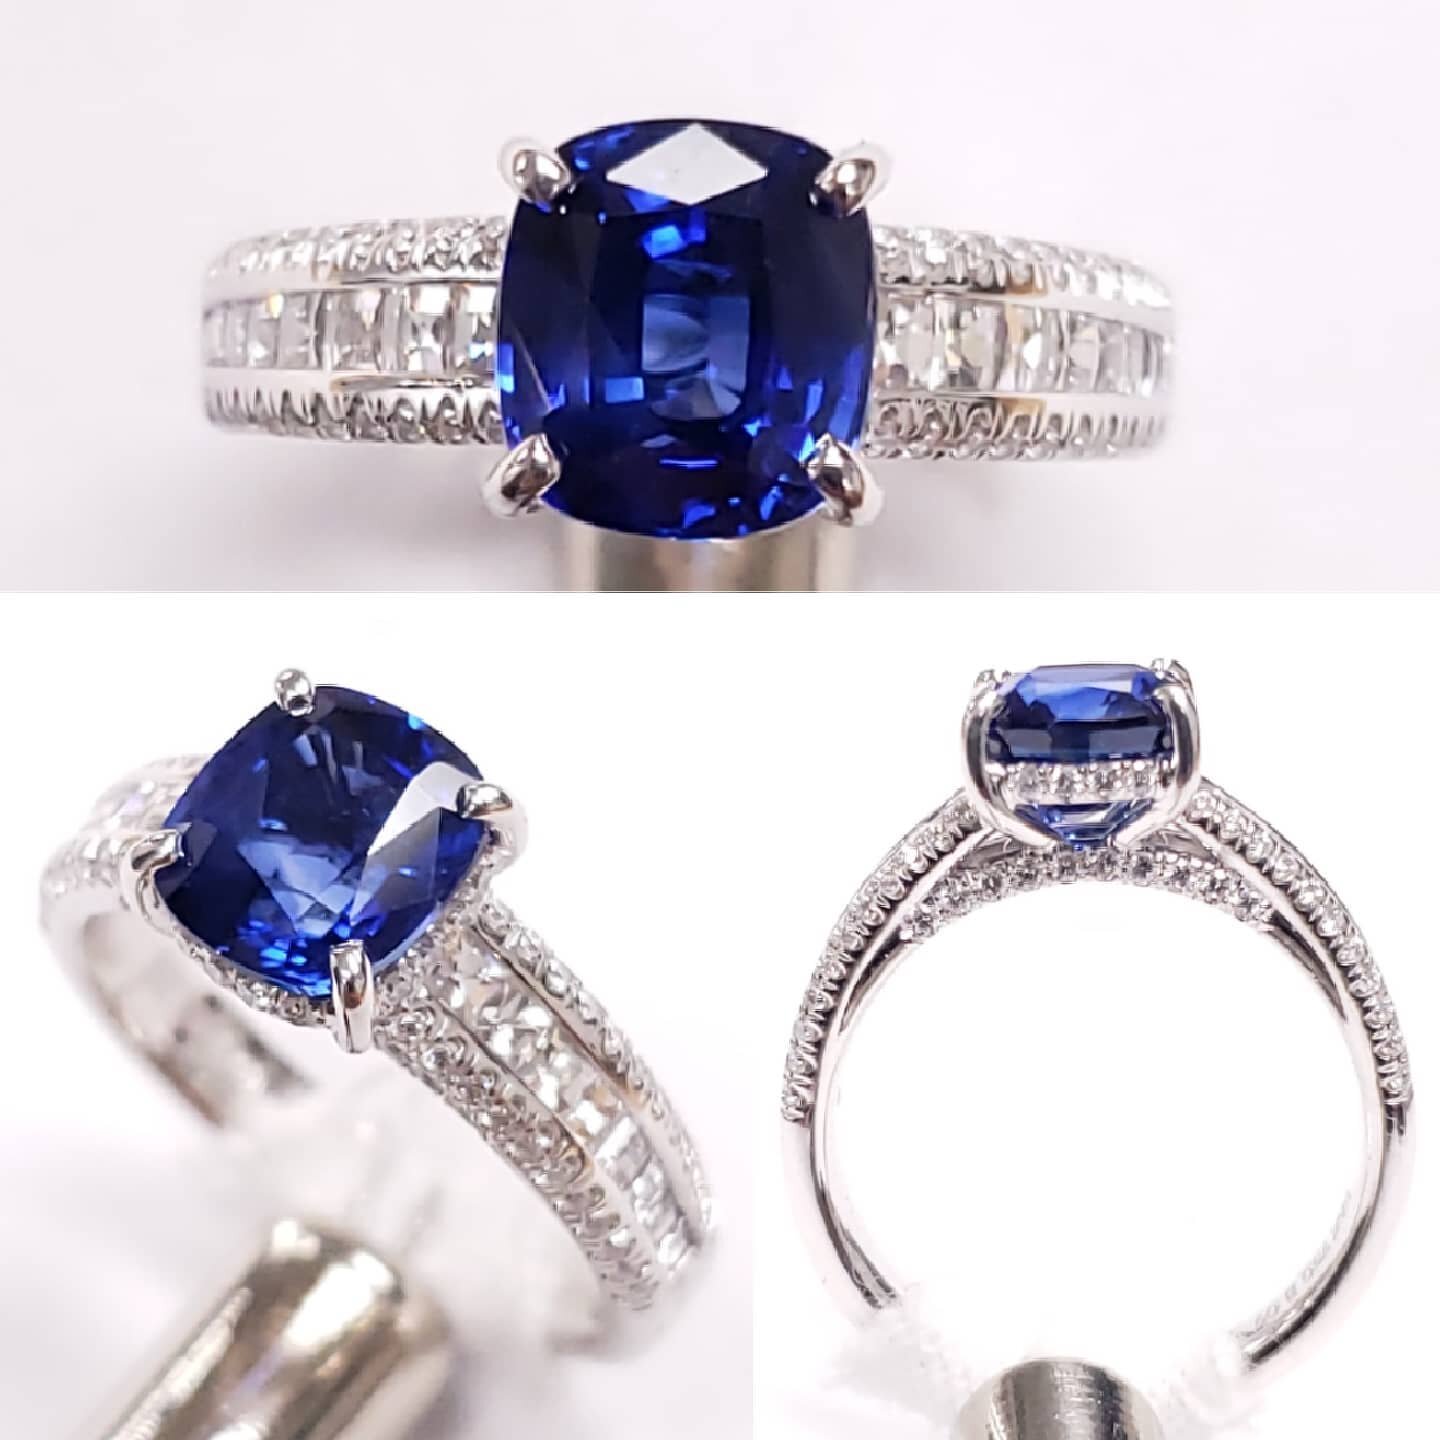 Love my colored stones!

Killer blue sapphire engagement ring. 2.48 carat cushion cut Sapphire with Blaze cut  and round diamonds in an 18k white gold mounting.

#lynnjewelers #sapphire #sapphirering #blazecutdiamonds #engagementring #engaged #diamon